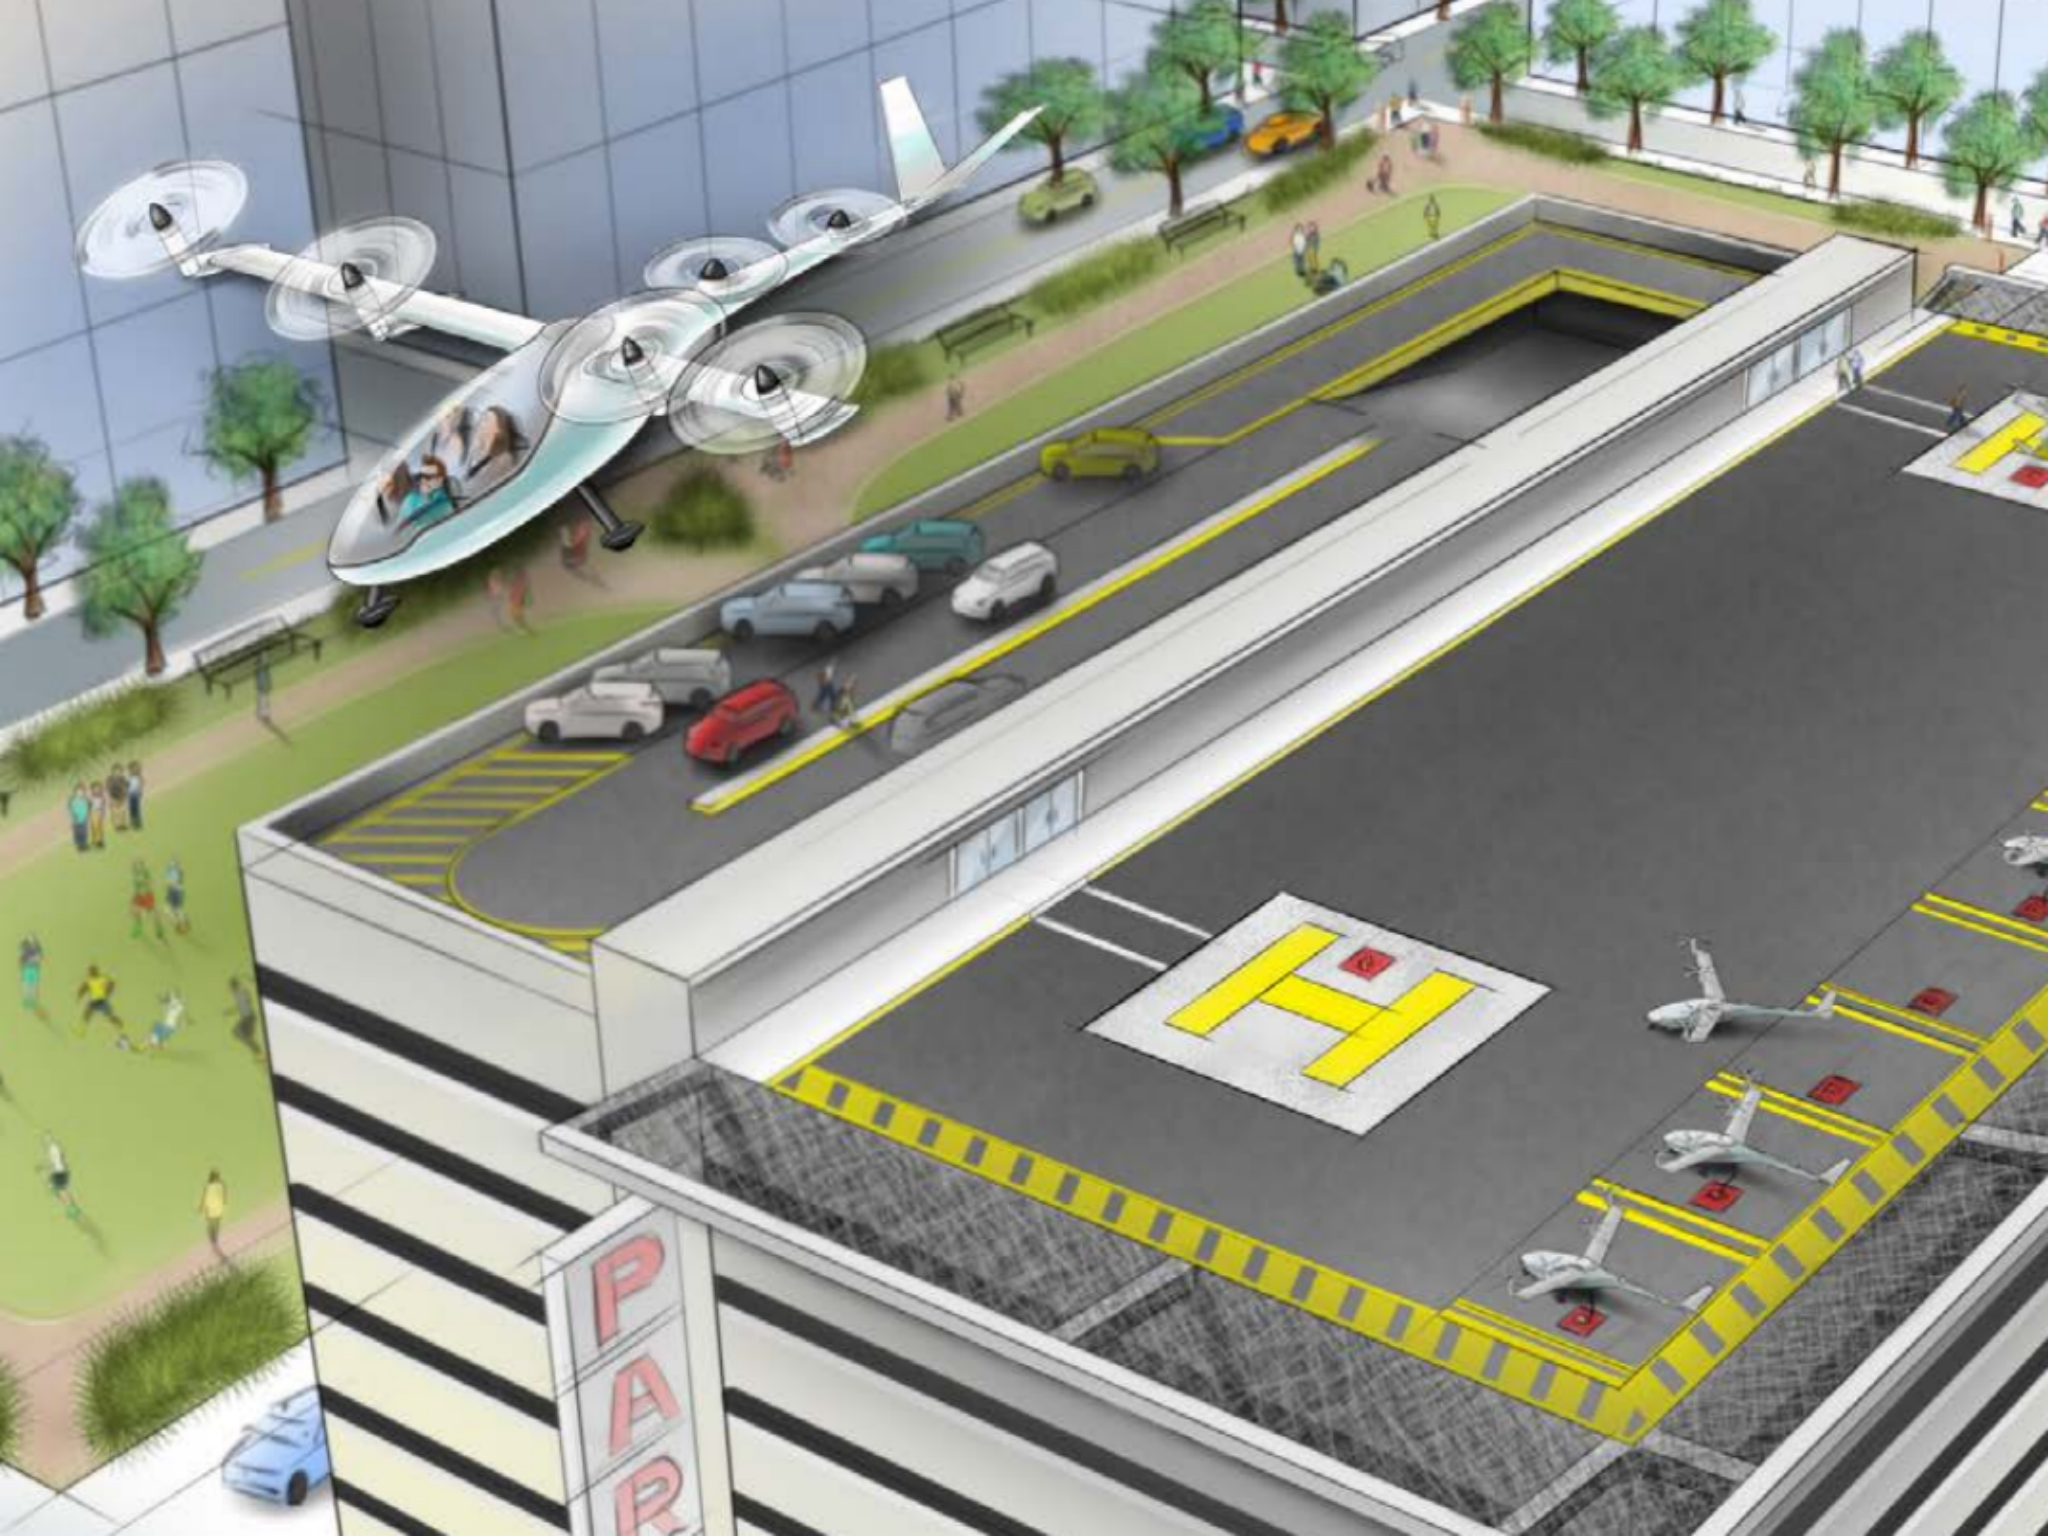 The company envisions a future in which consumers can take a regular Uber ride to a ‘vertiport’, where flying cars would be able to transport them to another vertiport located near their office